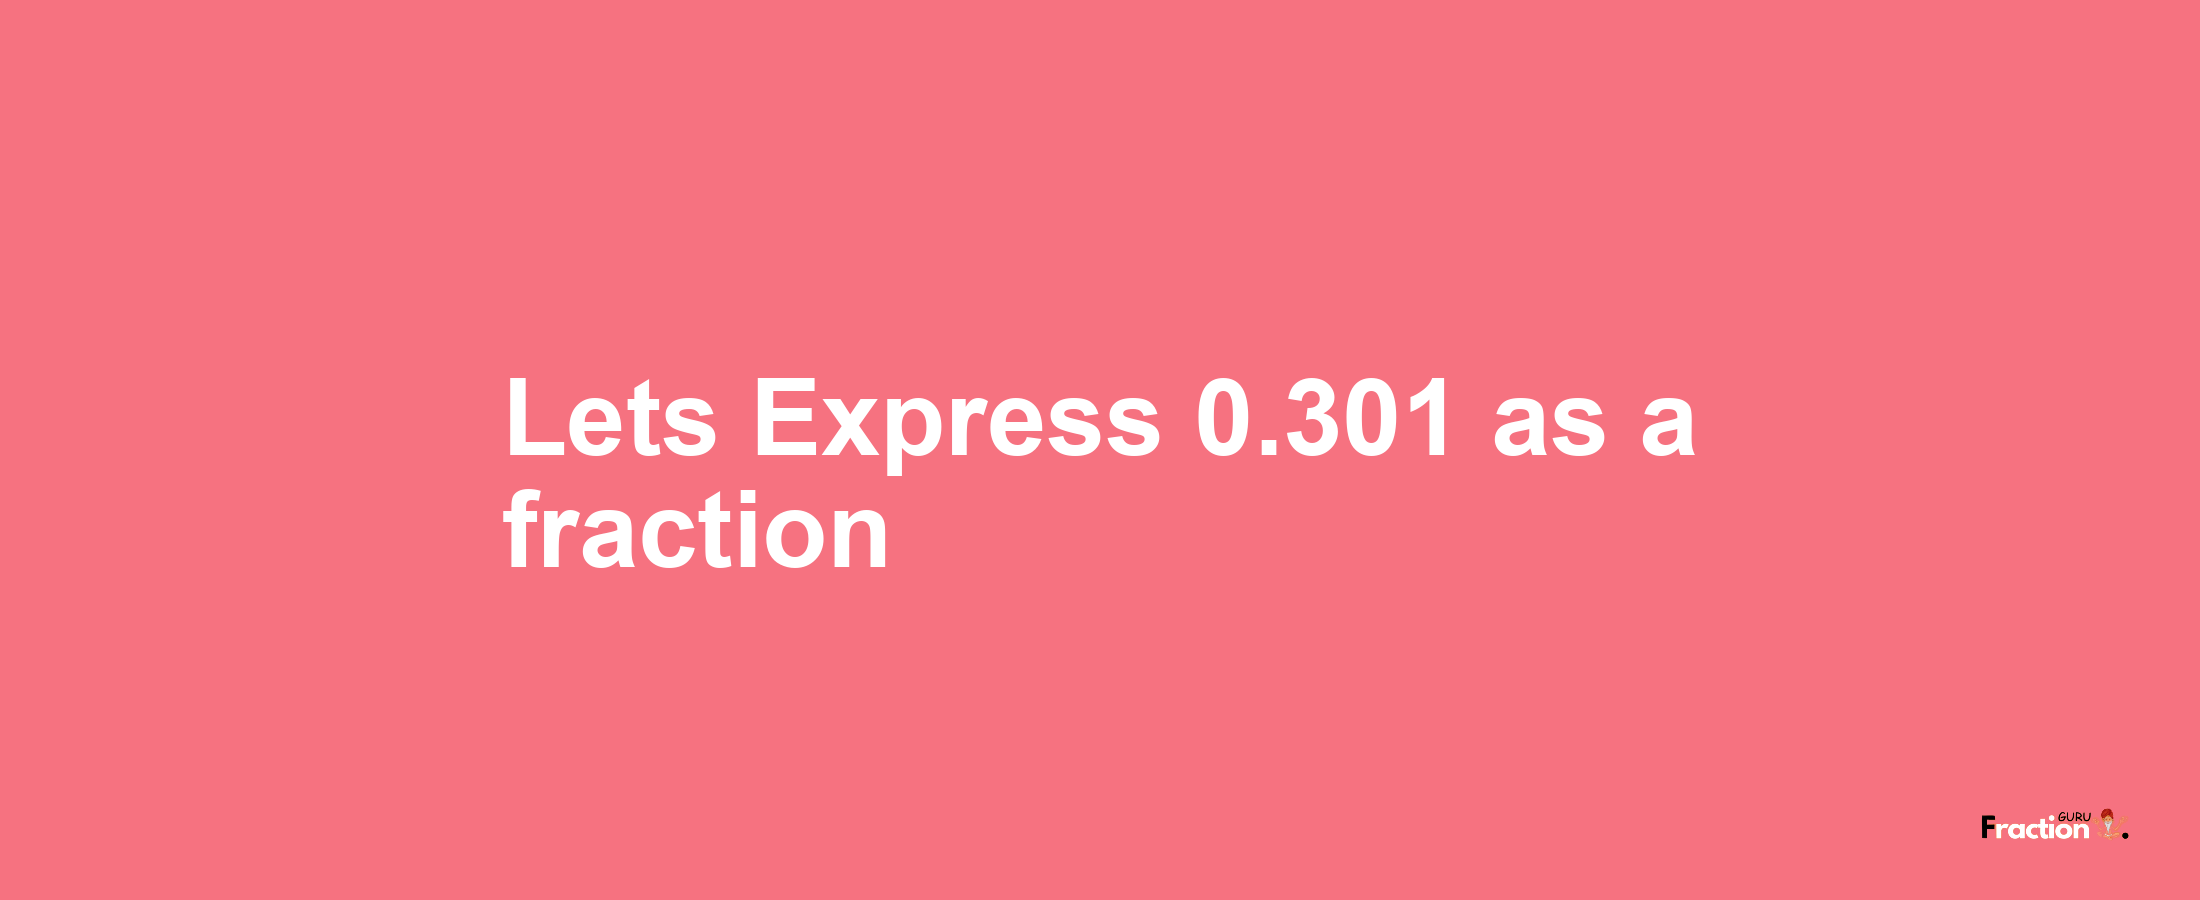 Lets Express 0.301 as afraction